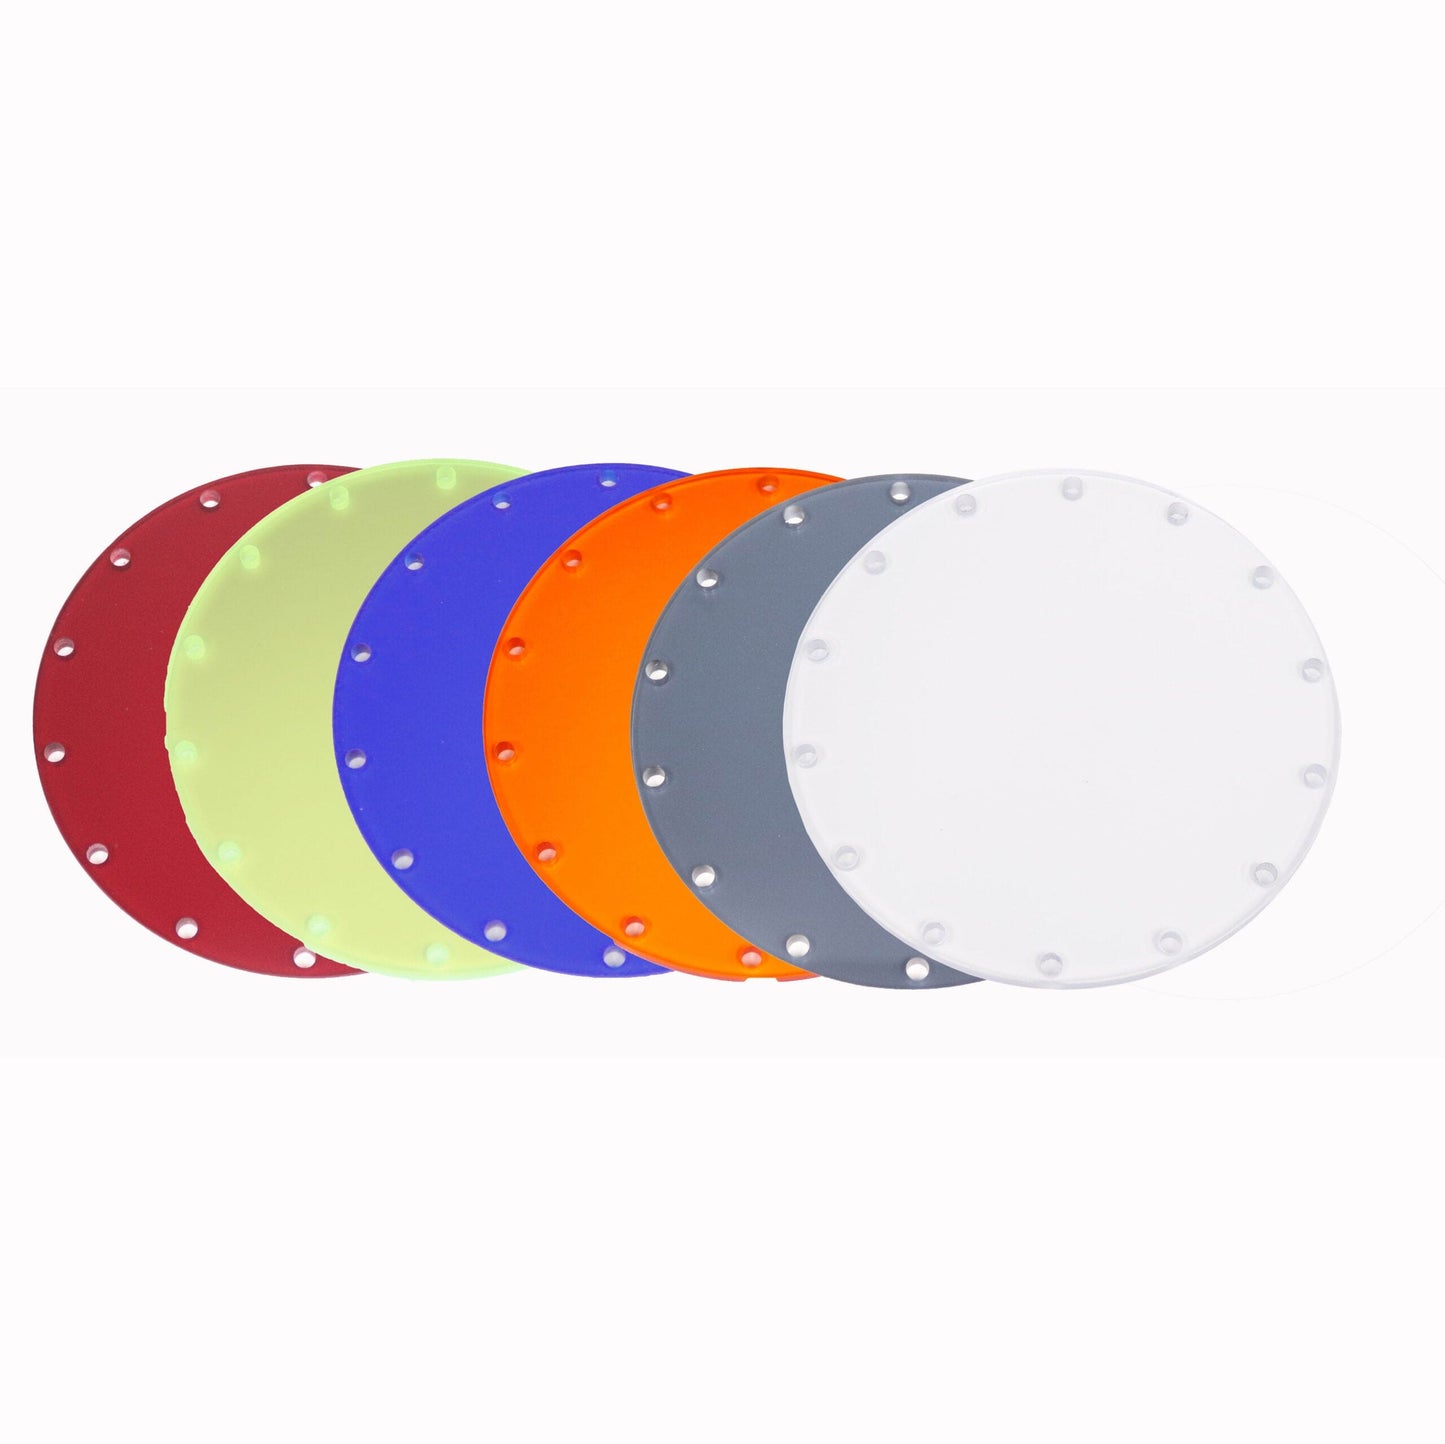 Modquad Clutch Lockout Replacement Lenses, 7 or 14 Holes, Assorted Colors *NEW*